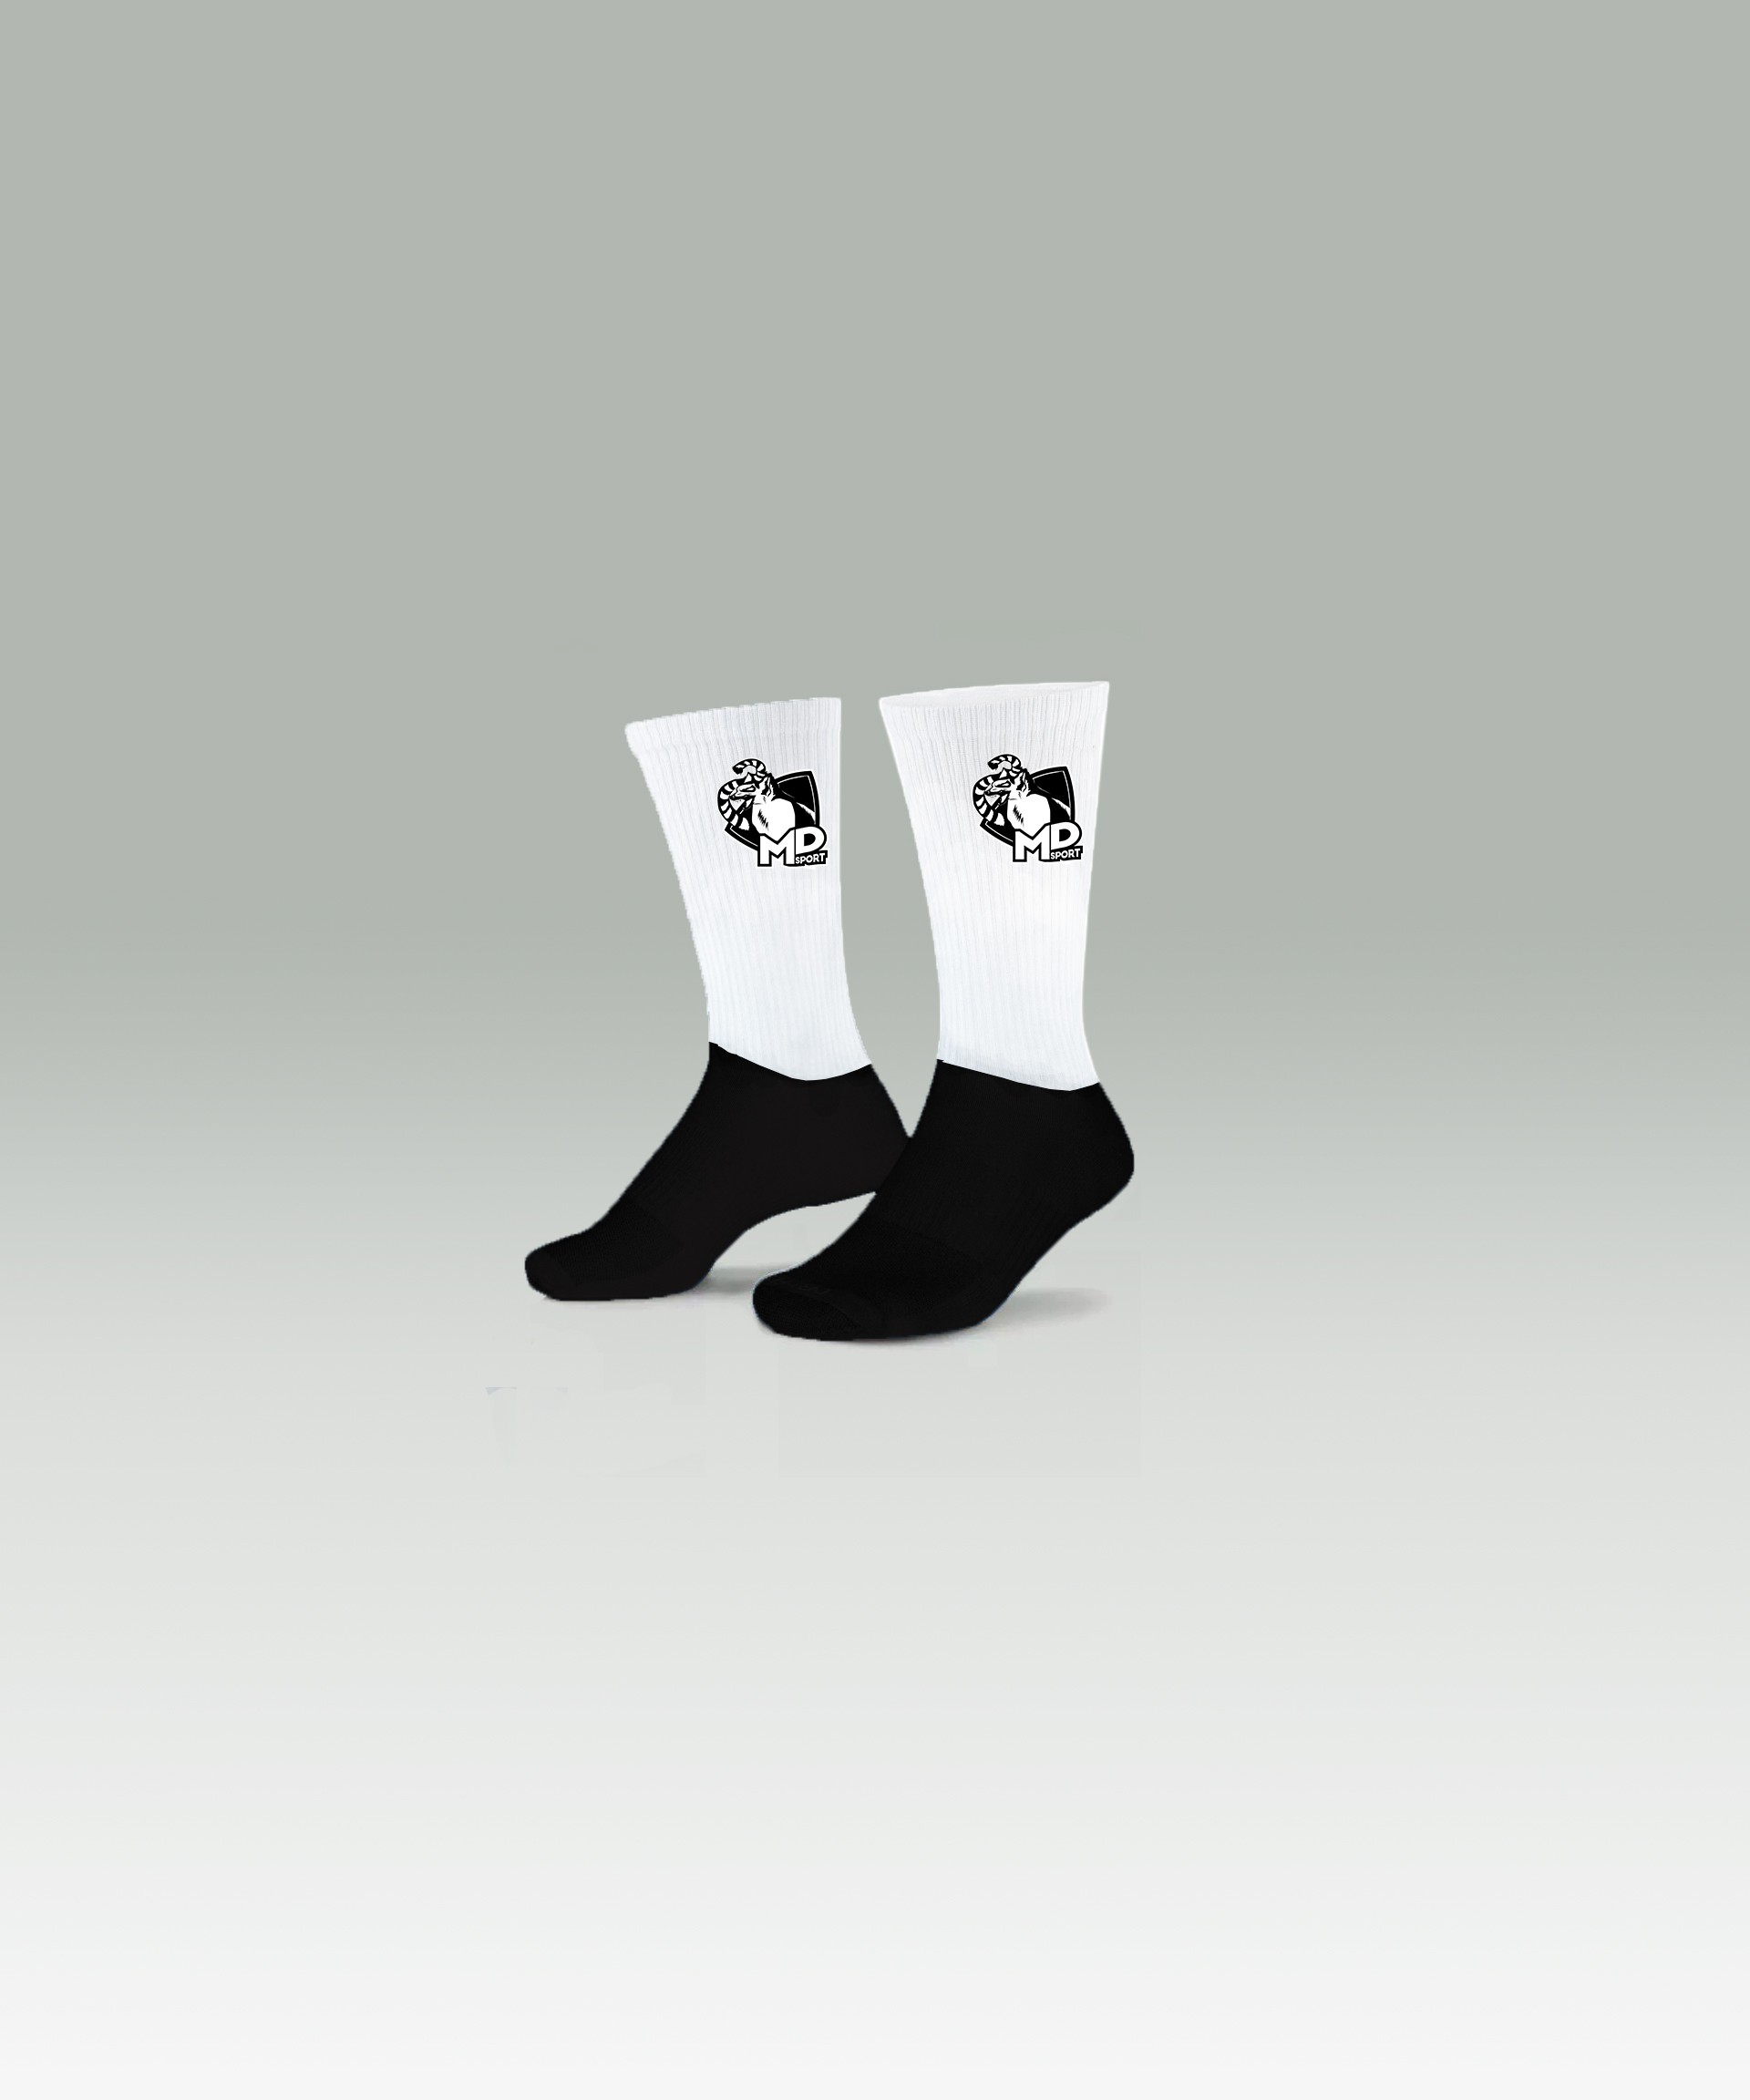 Chaussettes Md sport 269